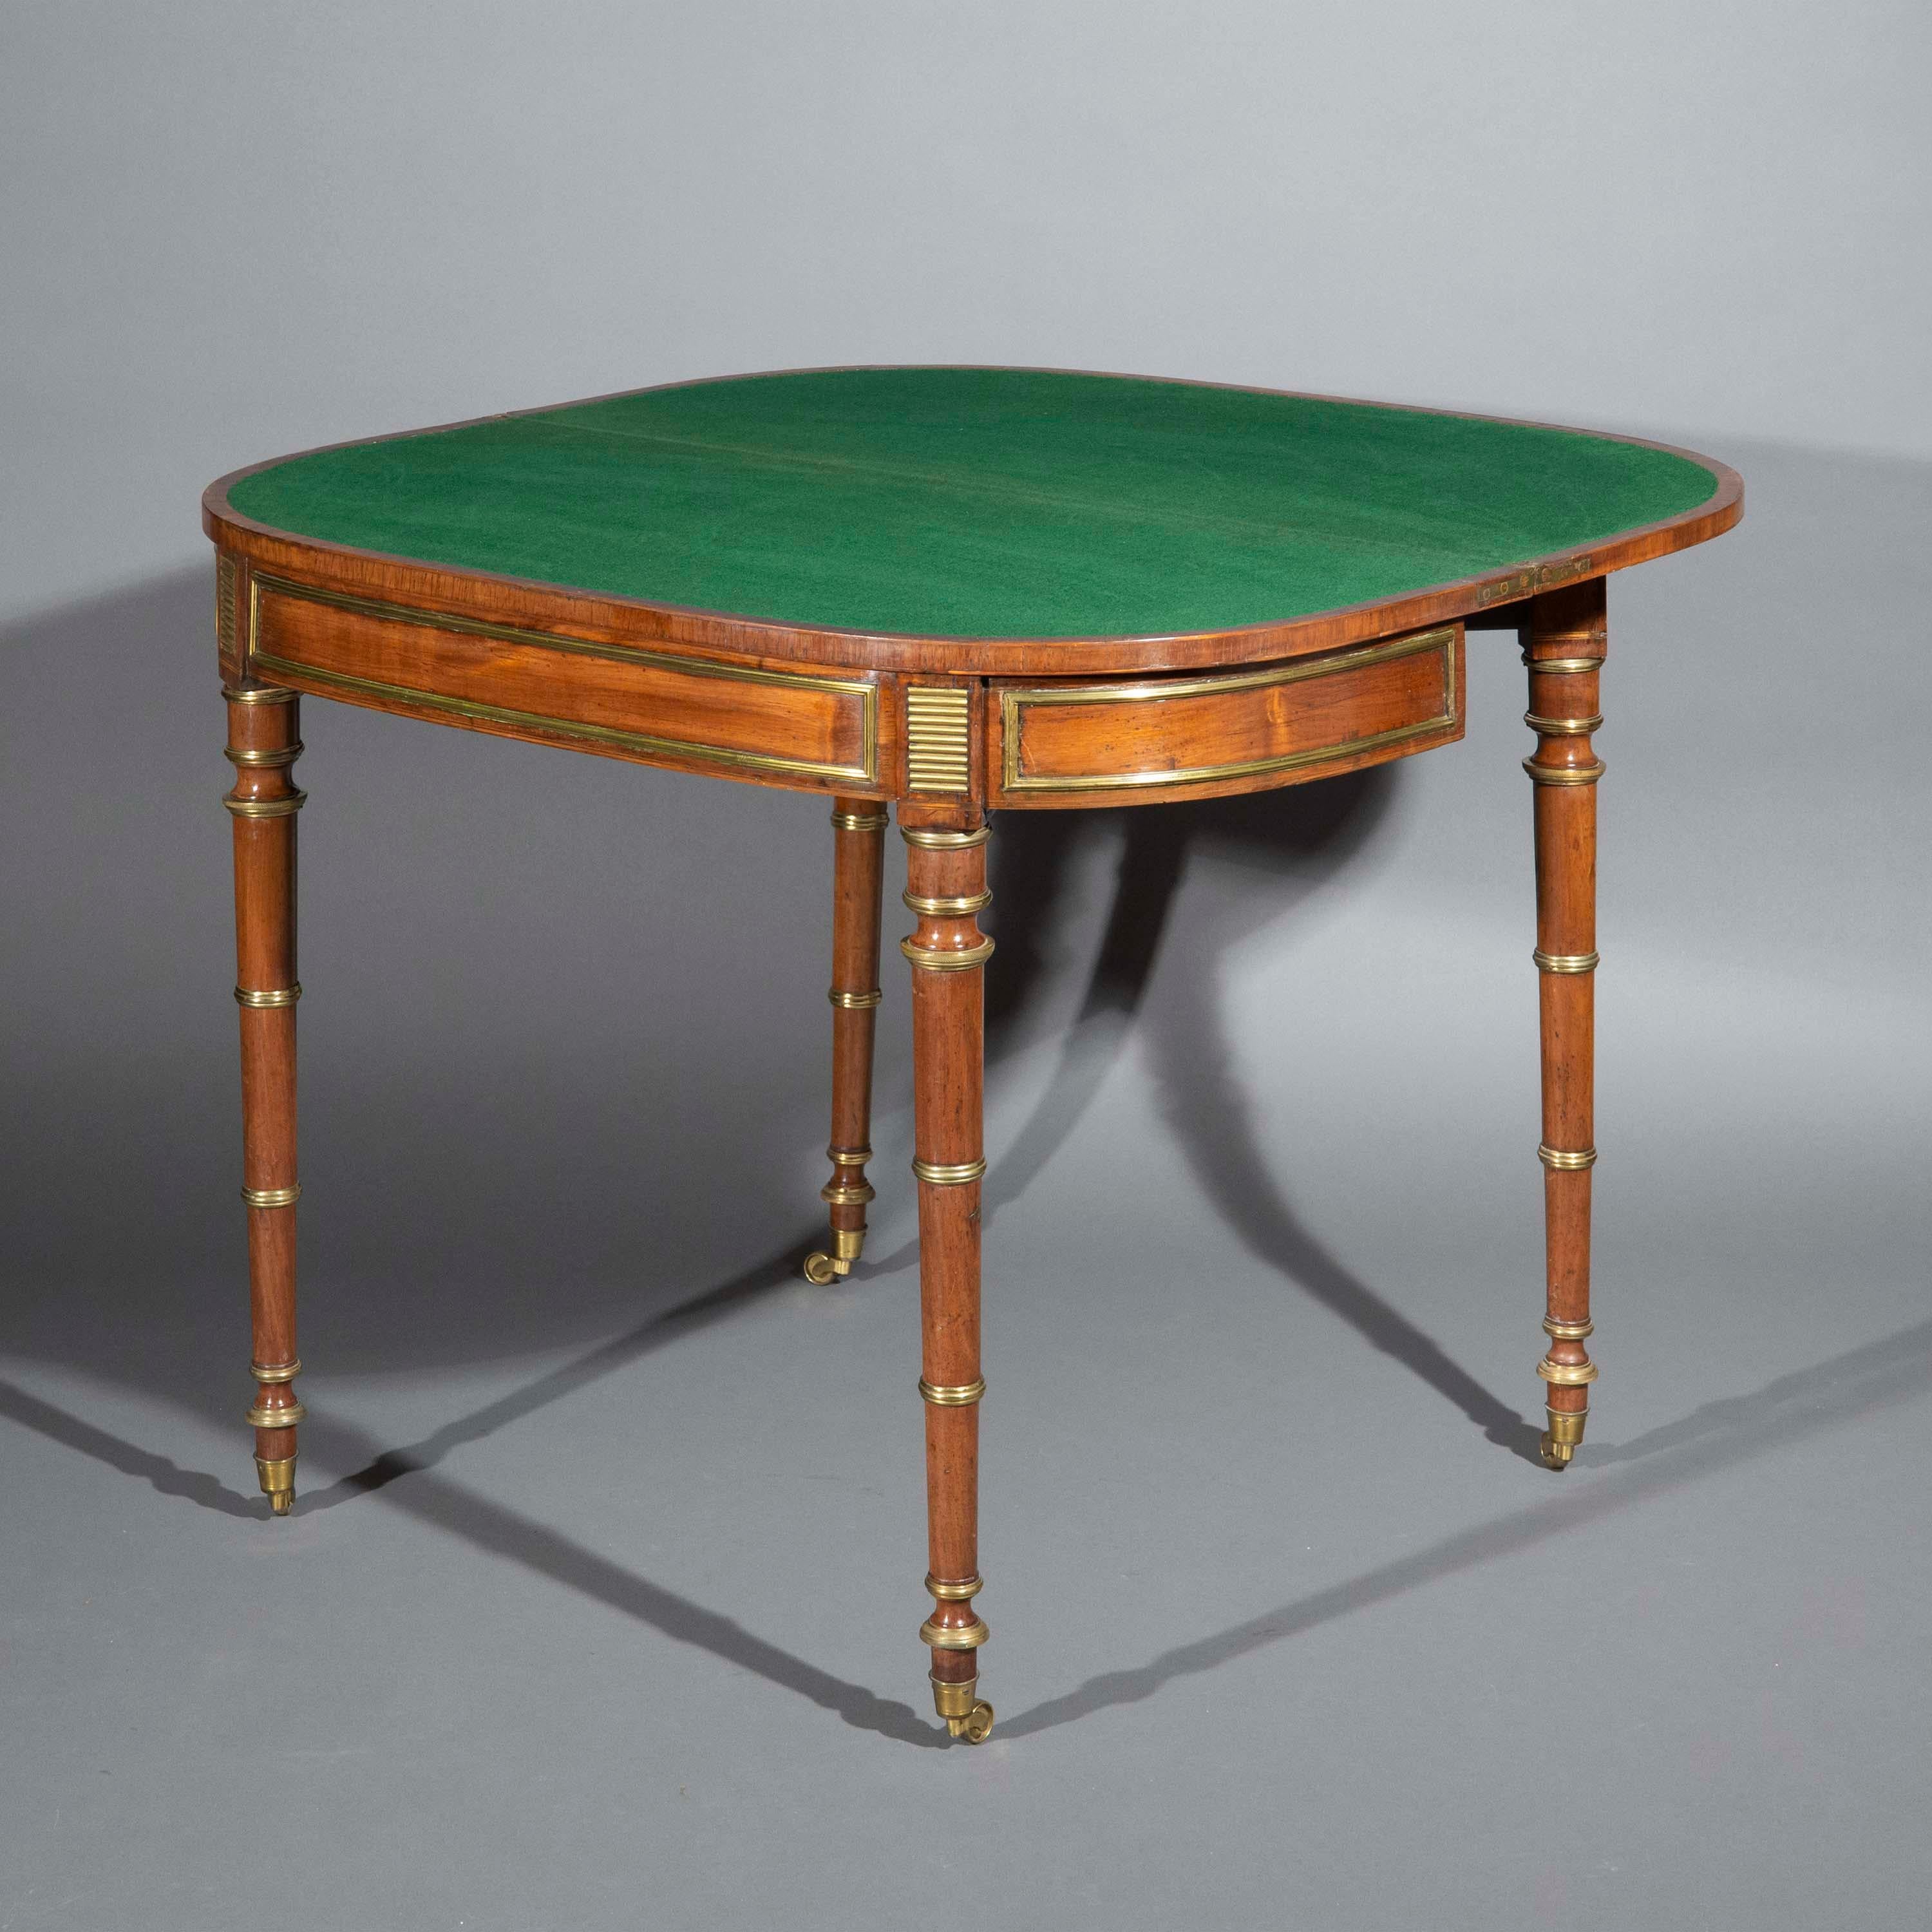 A very fine Regency period card table, firmly attributed to John McLean, 
London, circa 1810.

Why we like it
Early John McLean's furniture, of which this is a finest example, is super elegant with its clean lines and exquisite but understated